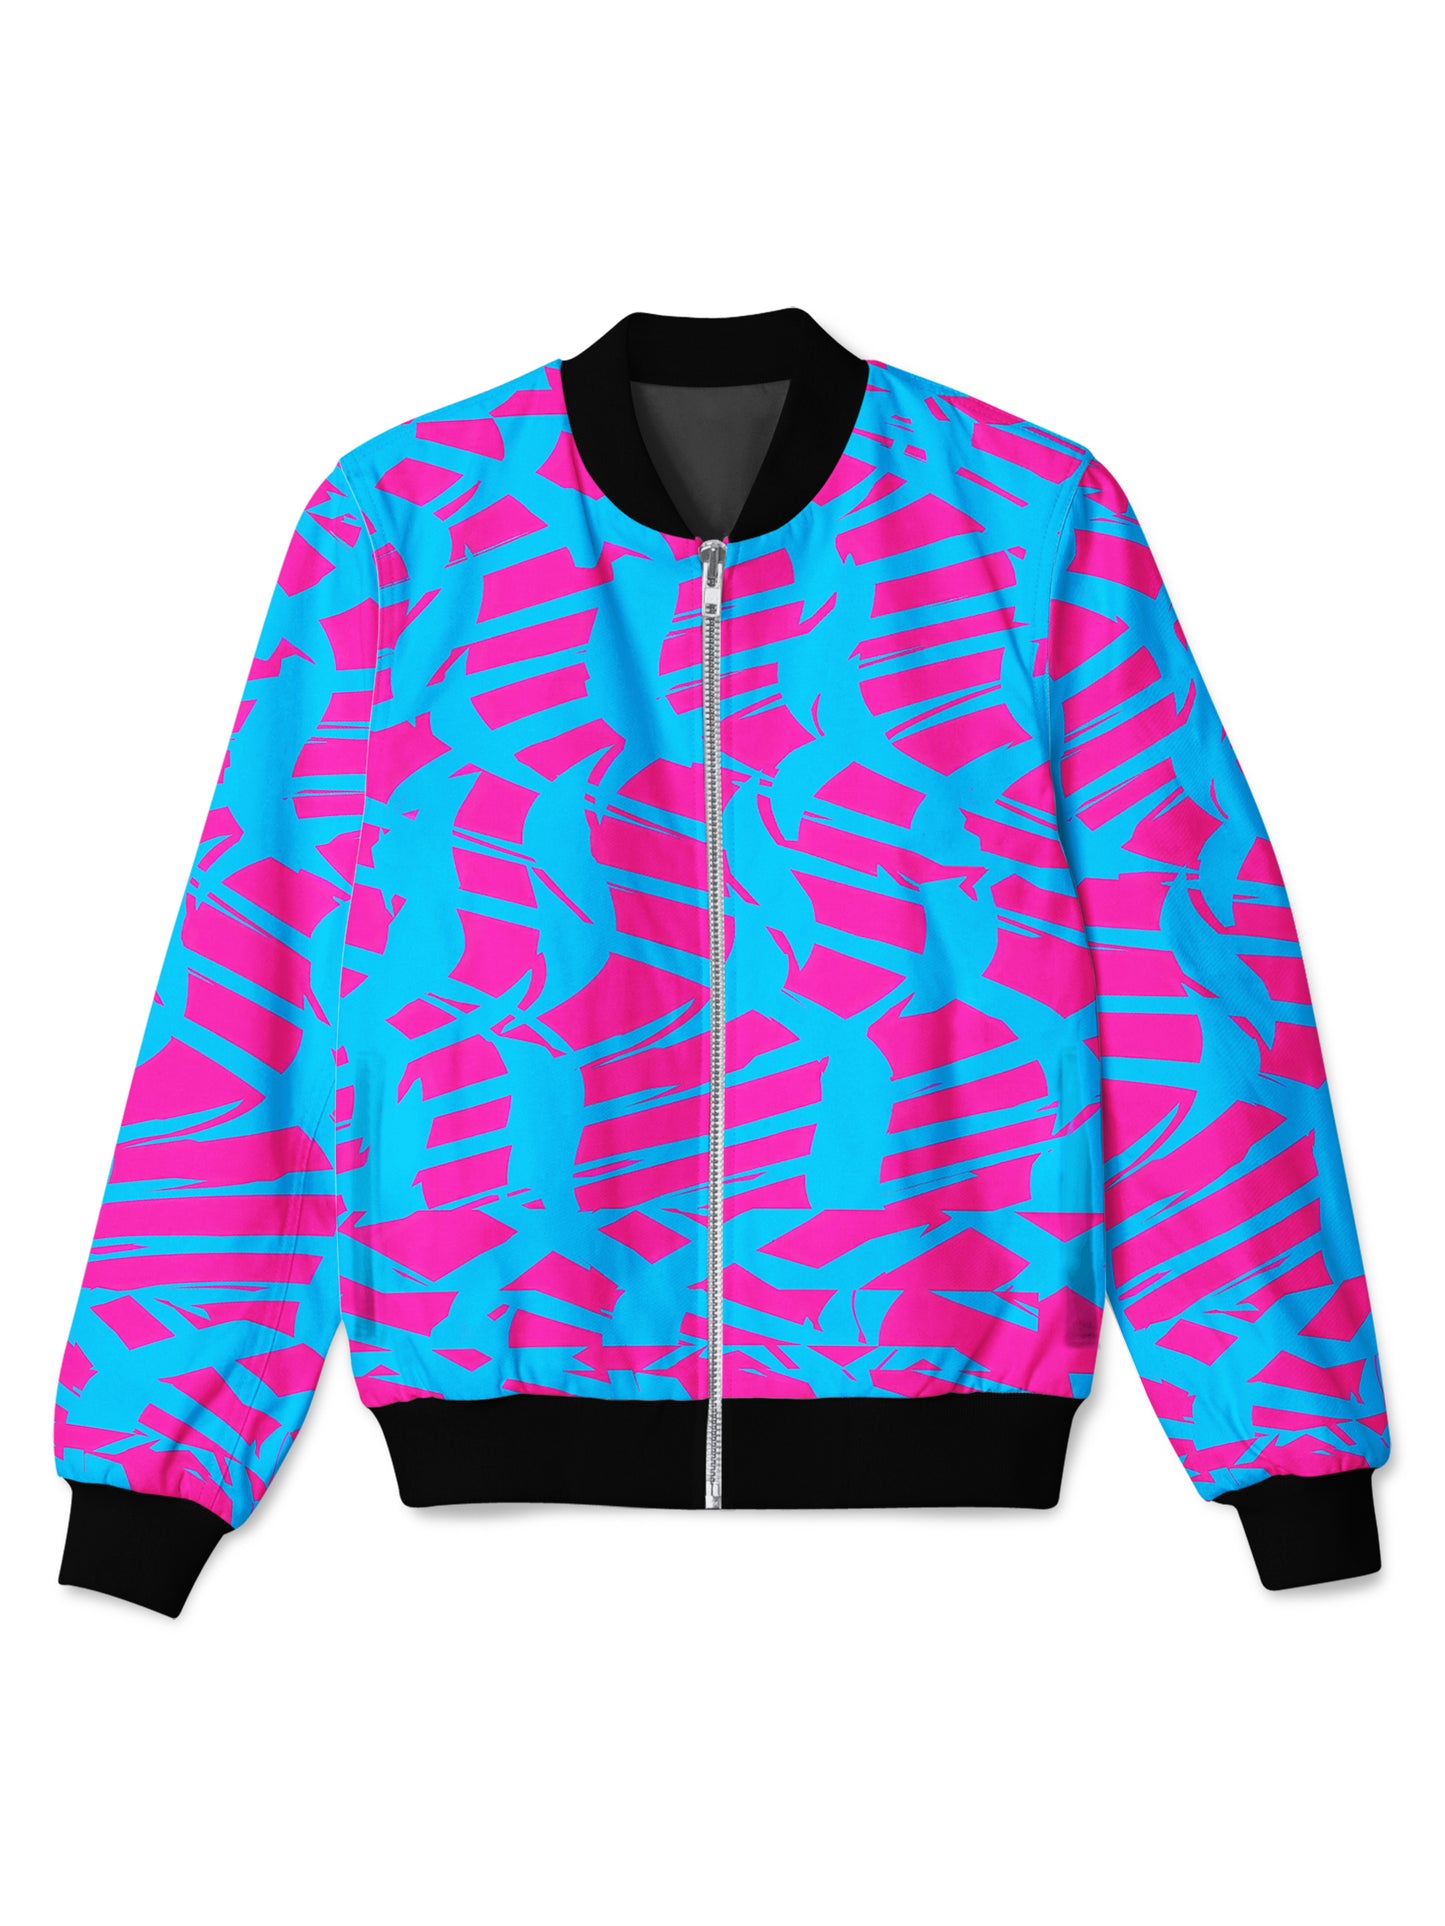 Pink and Blue Squiggly Rave Checkered Bomber Jacket, Big Tex Funkadelic, | iEDM